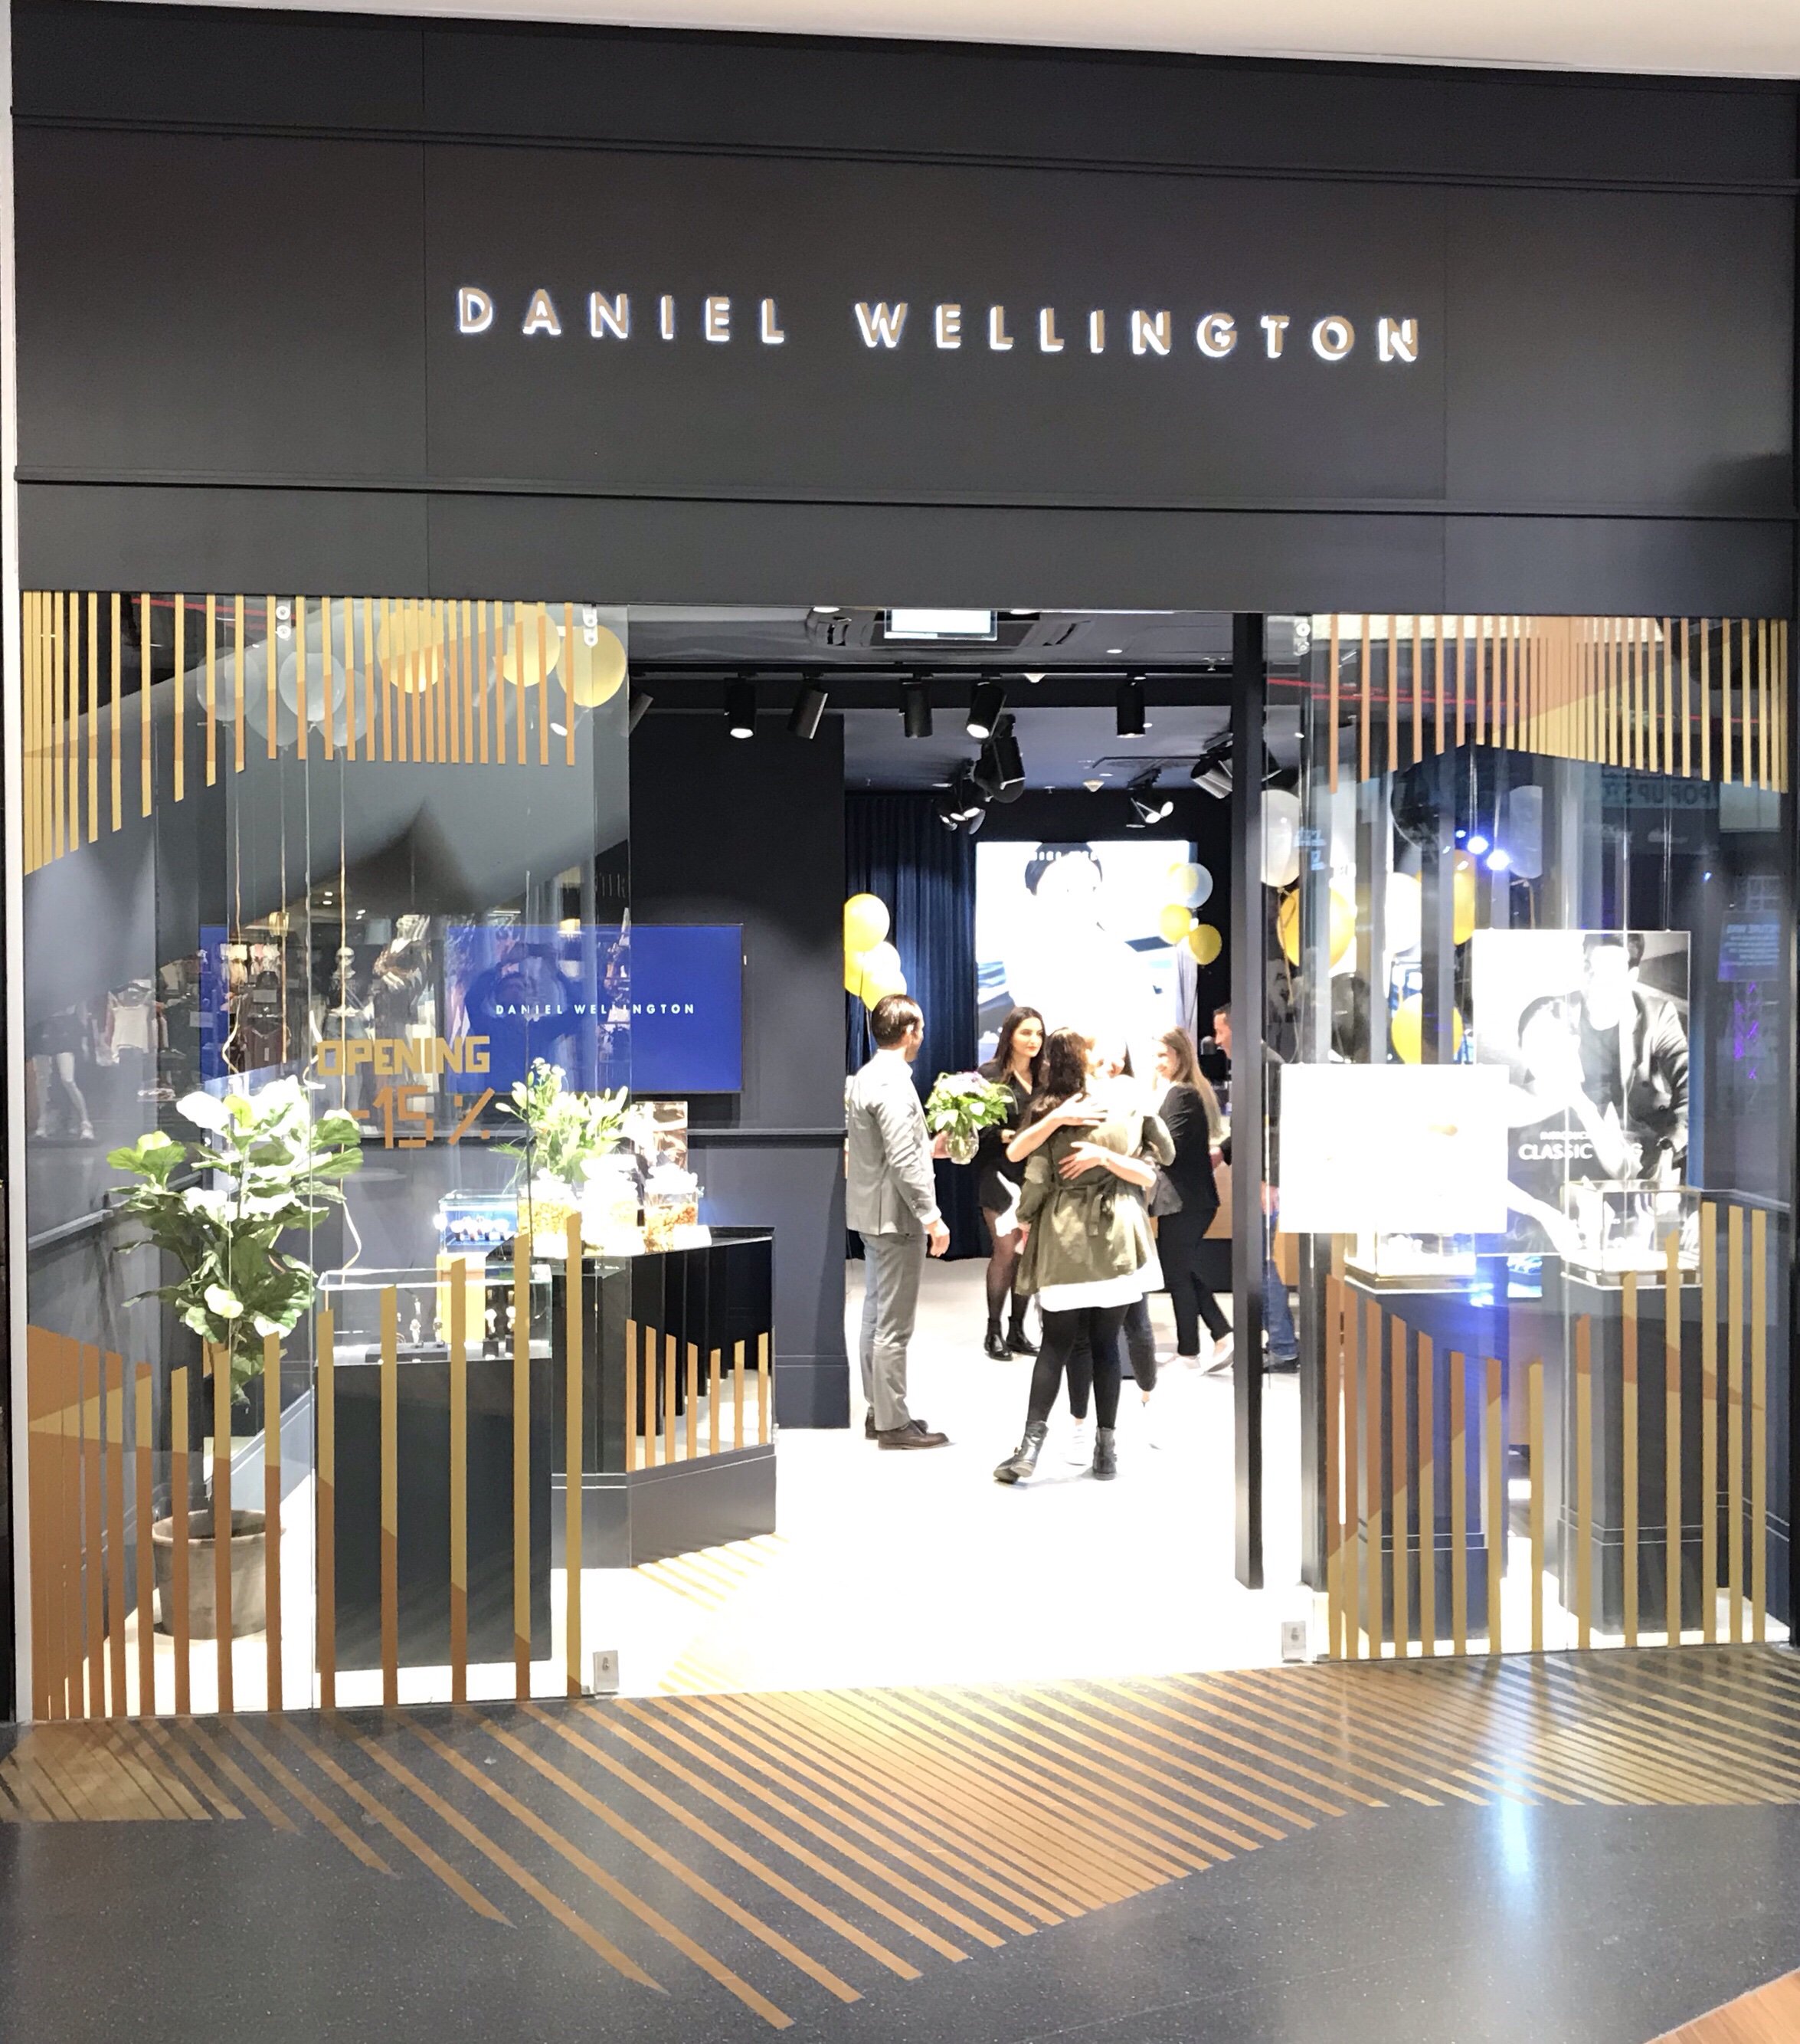 Konkurrencedygtige Moderne Stadion تويتر \ Daniel Wellington على تويتر: "On May 15th, our store in Frankfurt  in Germany opened its doors in MyZeil shopping mall. You can find us at  Zeil 106! Come visit us